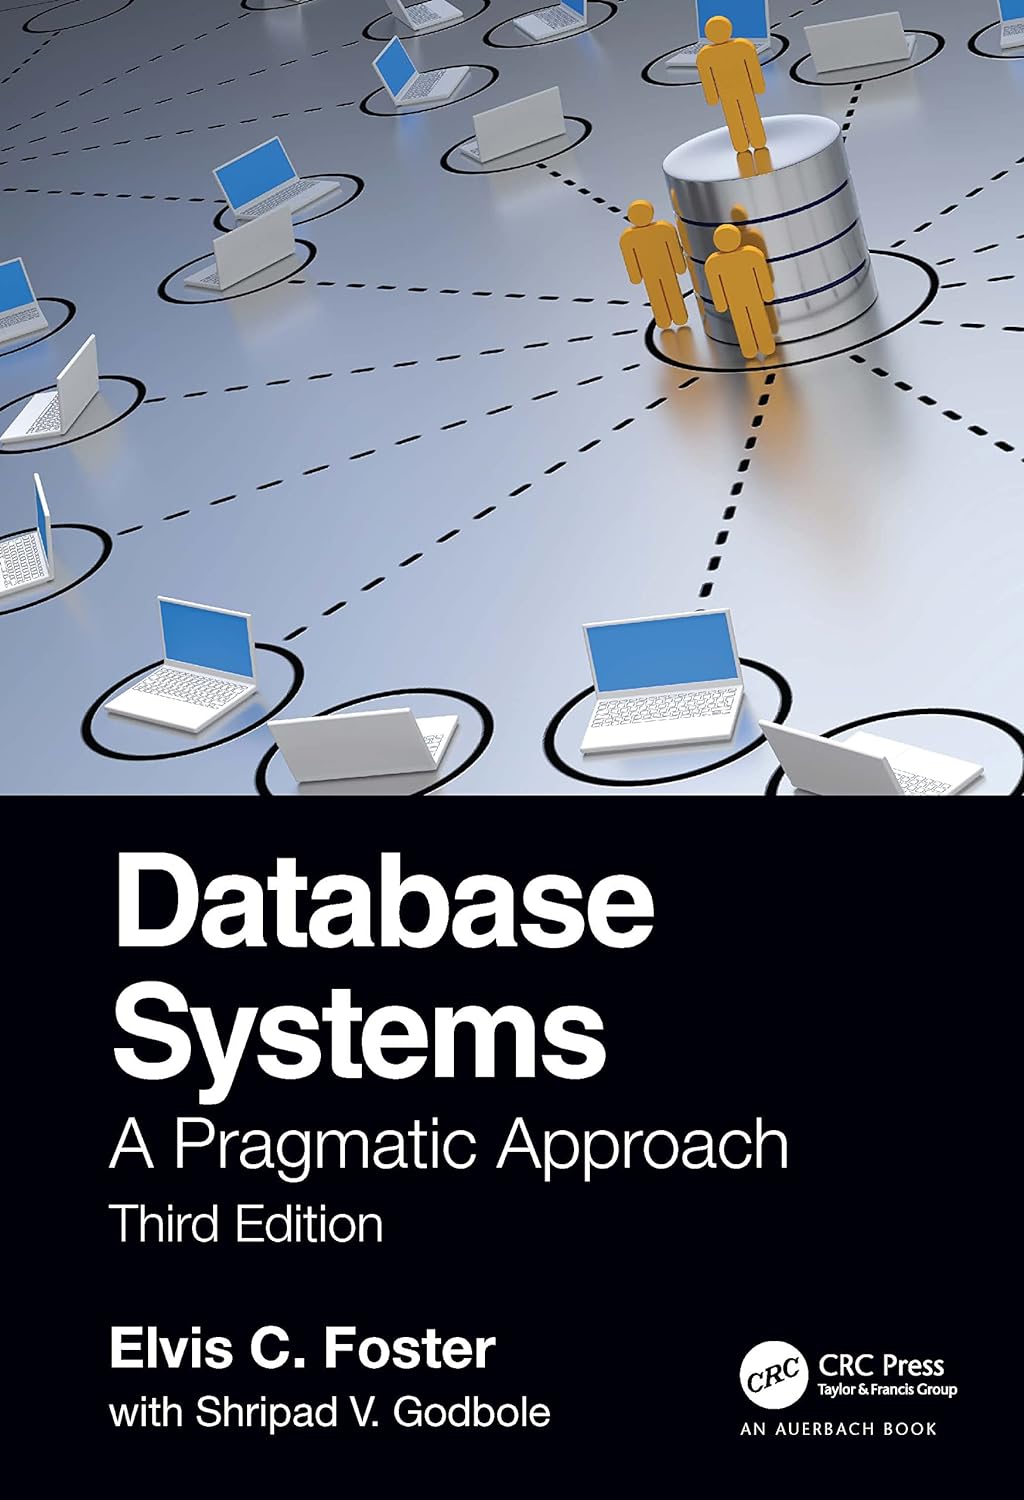 Database Systems: A Pragmatic Approach, 3rd Edition by Elvis Foster